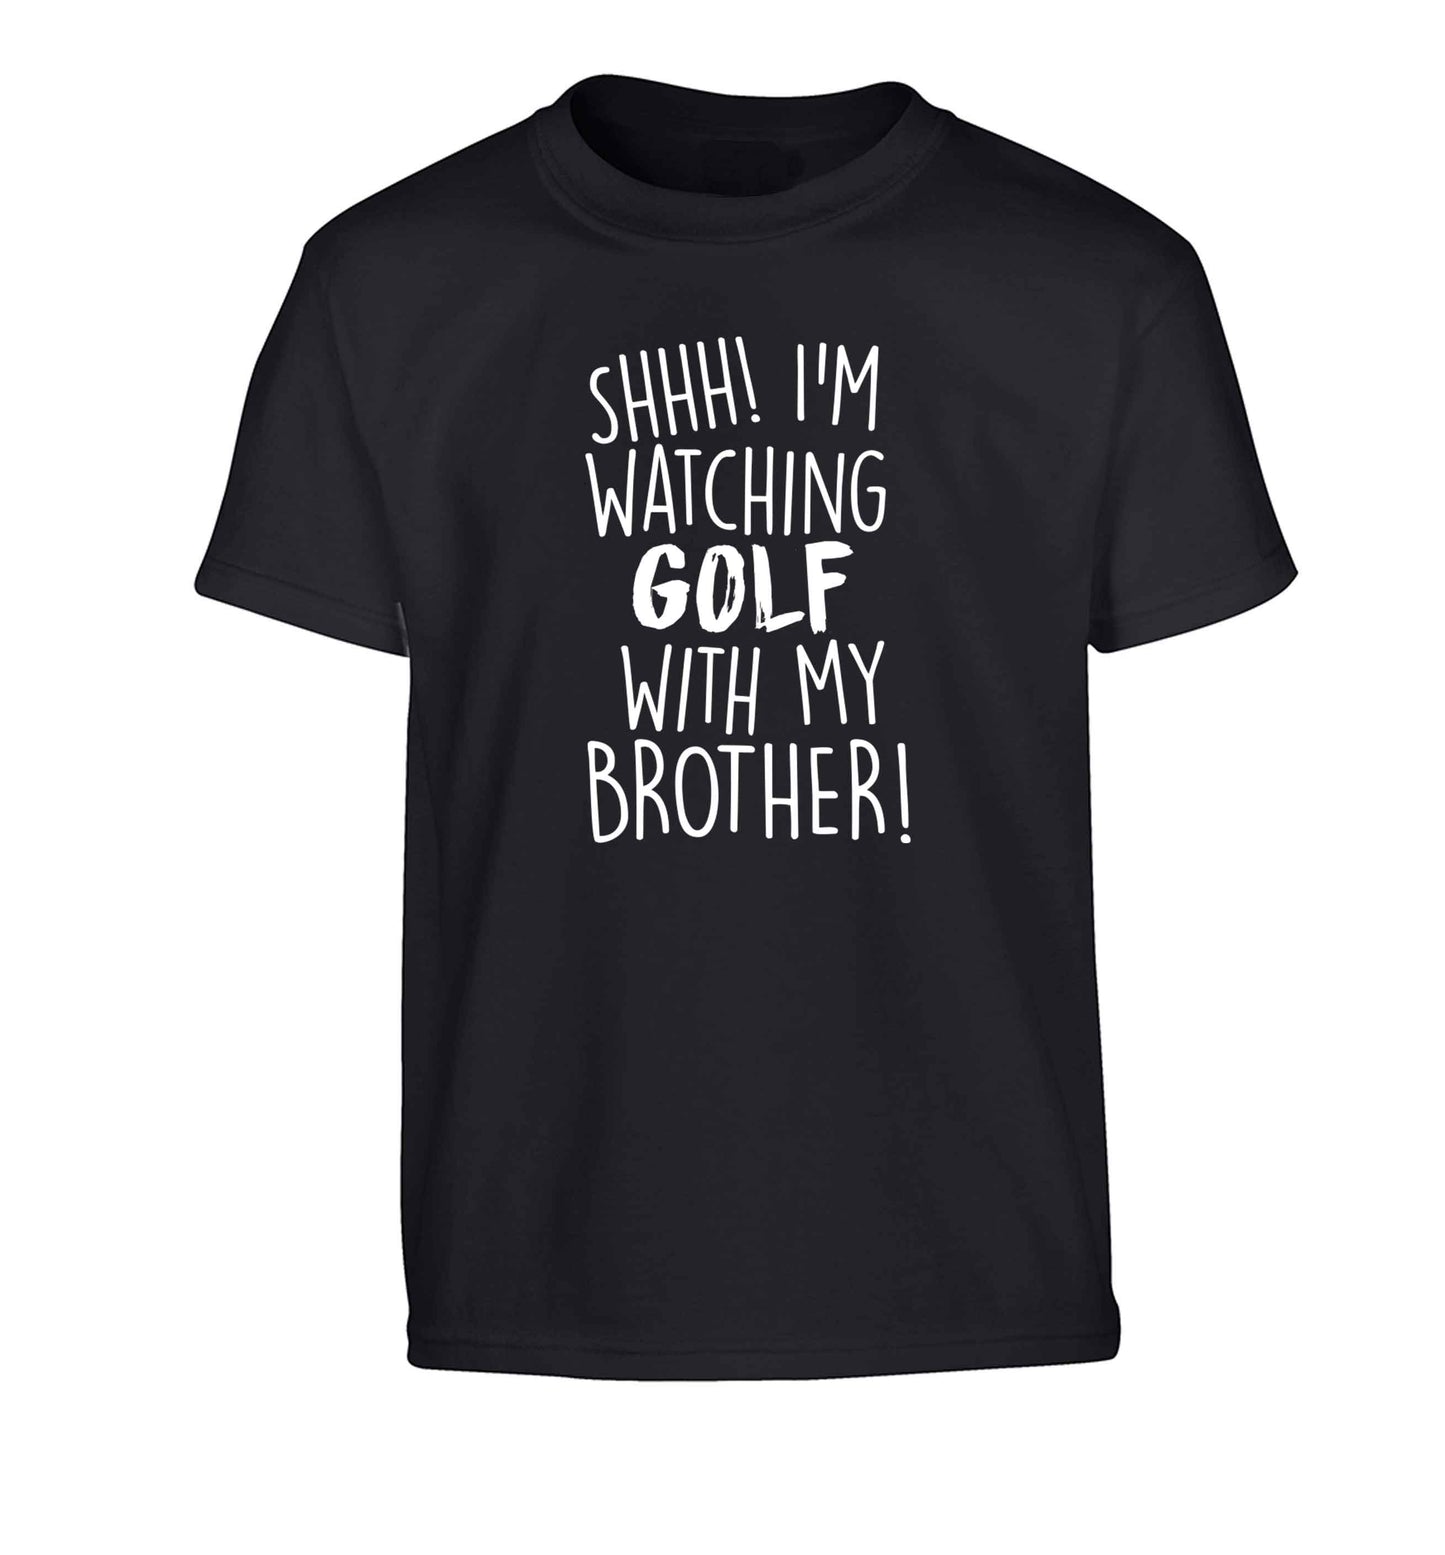 Shh I'm watching golf with my brother Children's black Tshirt 12-13 Years